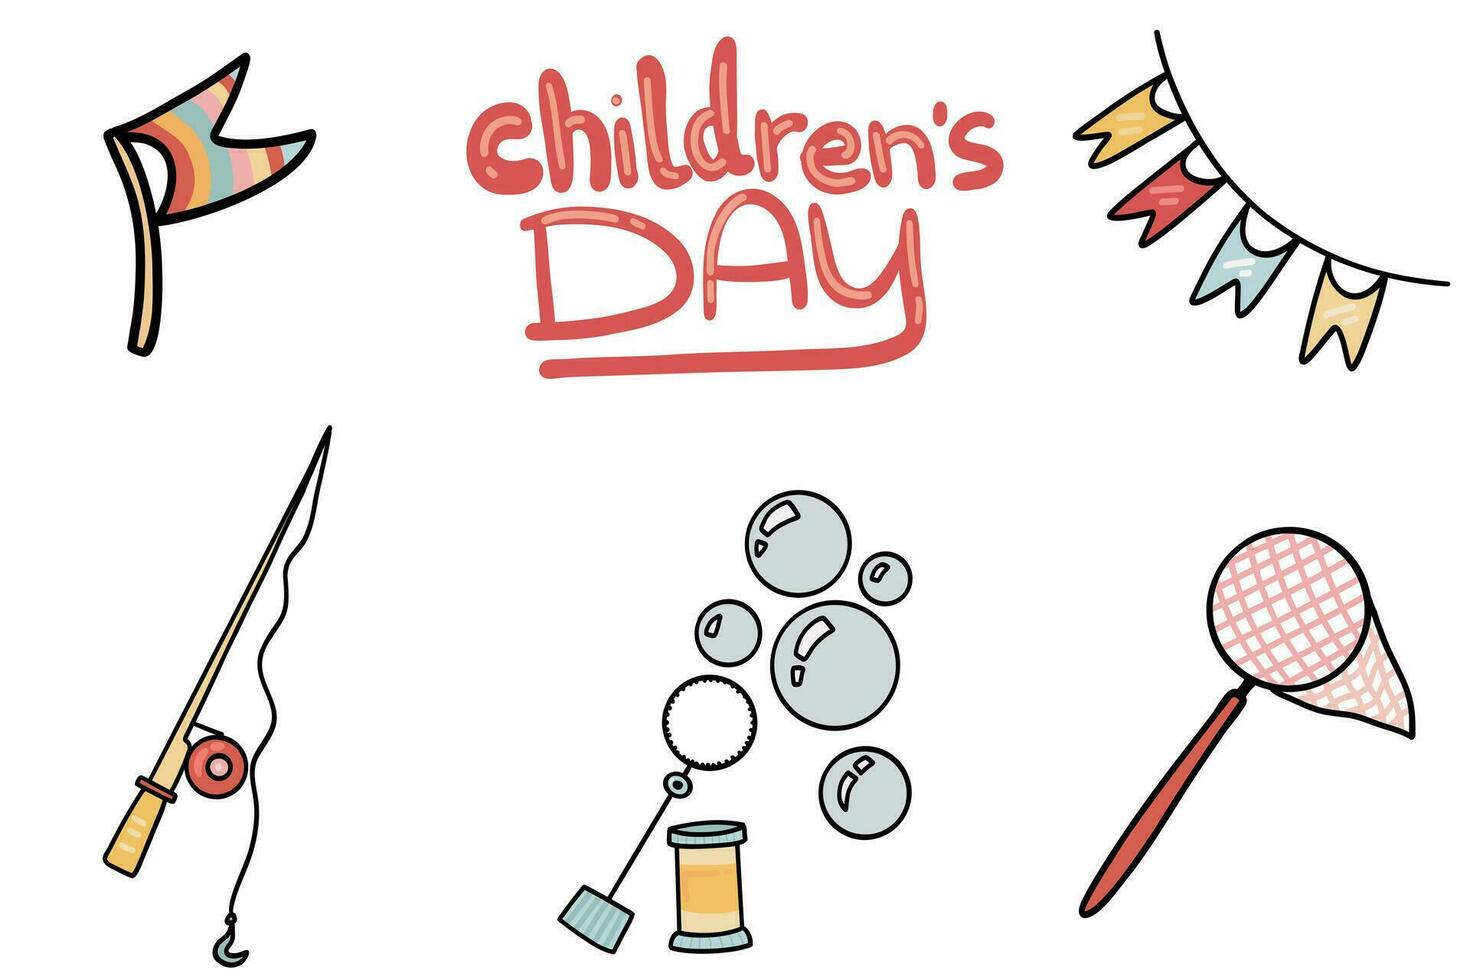 Children's day hand drawn ribbons set vector